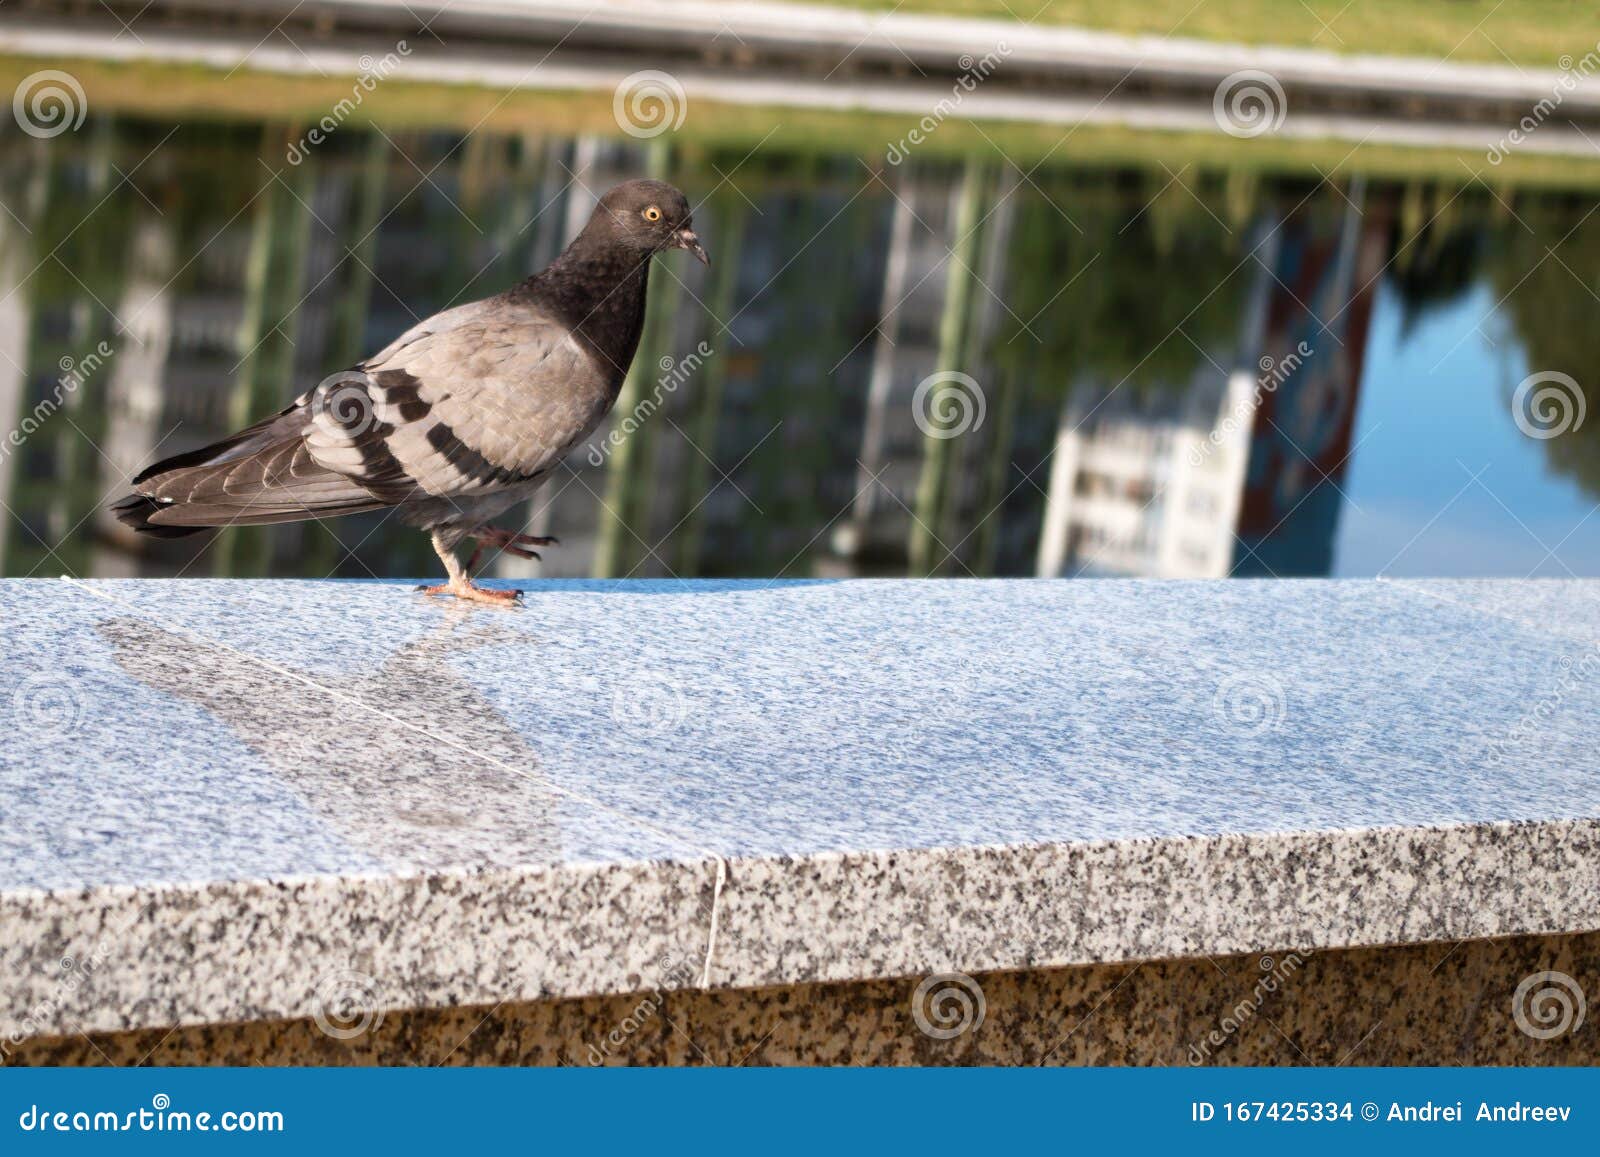 the bluish gray city pigeon walking on the speckled gray marble parapet